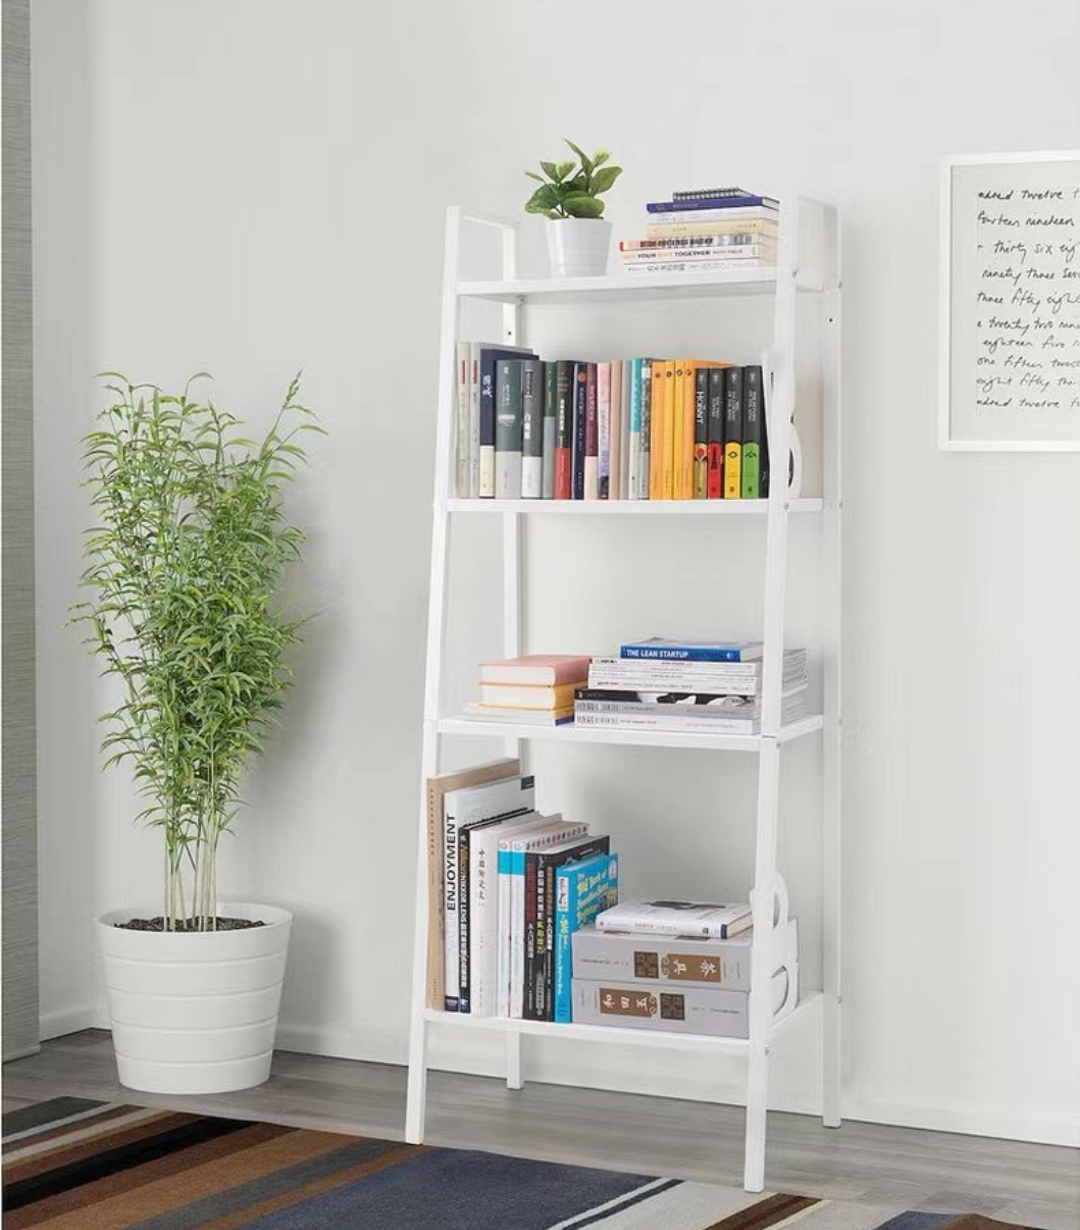 A classic and timeless wooden shelf unit